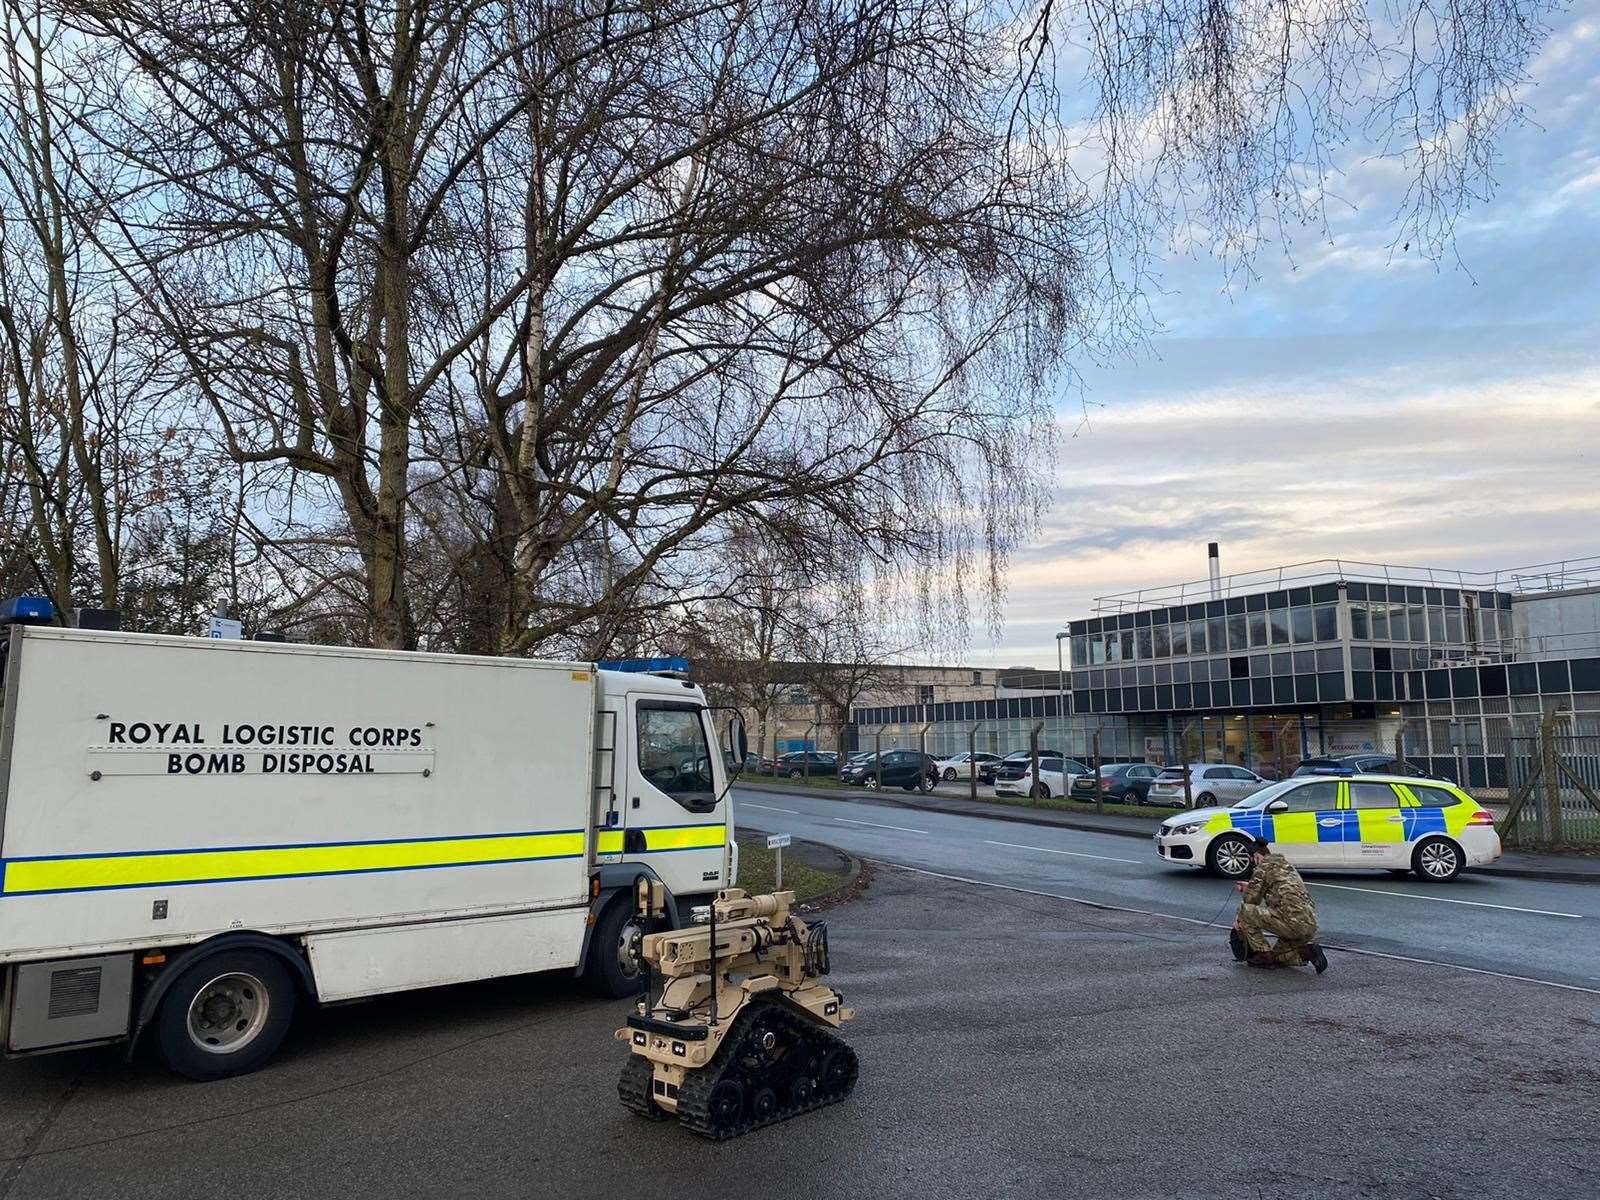 Bomb squad soldiers and police were called to the Wockhardt factory in Wrexham where Covid vaccines are put into vials after a suspicious package was sent there. Picture: 11 Explosive Ordnance Disposal and Search Regiment Royal Logistics Corps/MoD